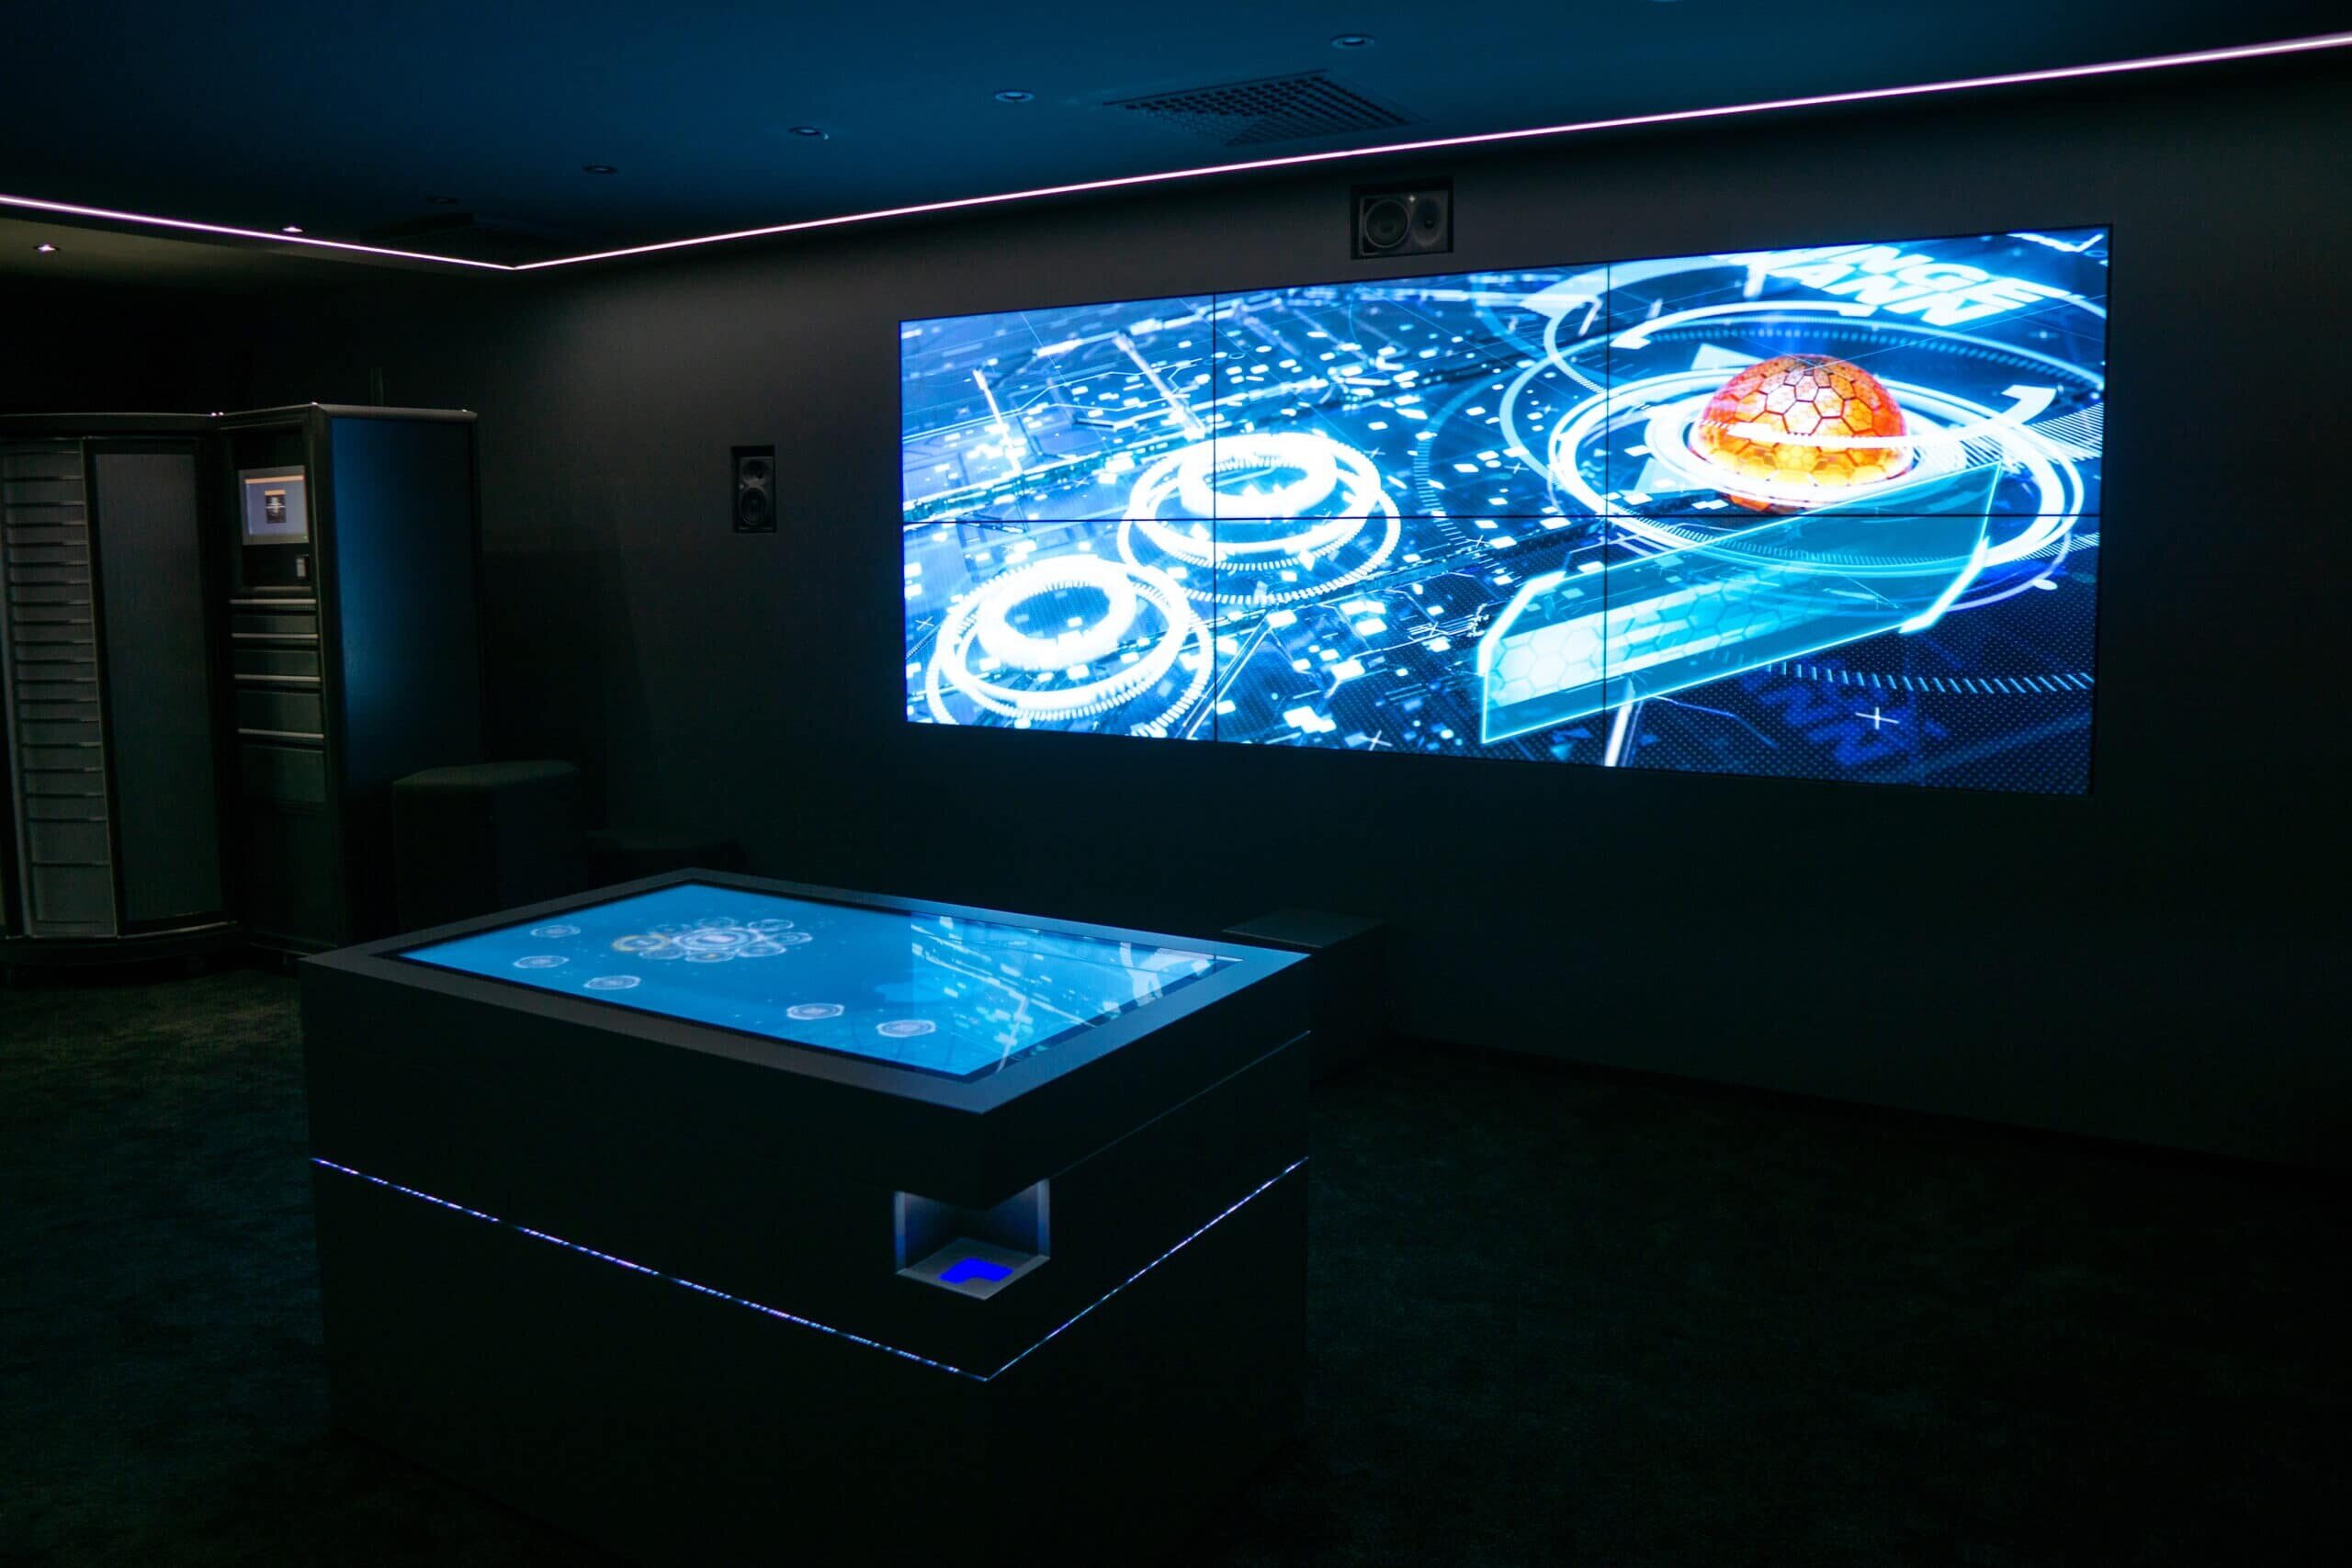 Video wall and multi-touch table are coupled with light control